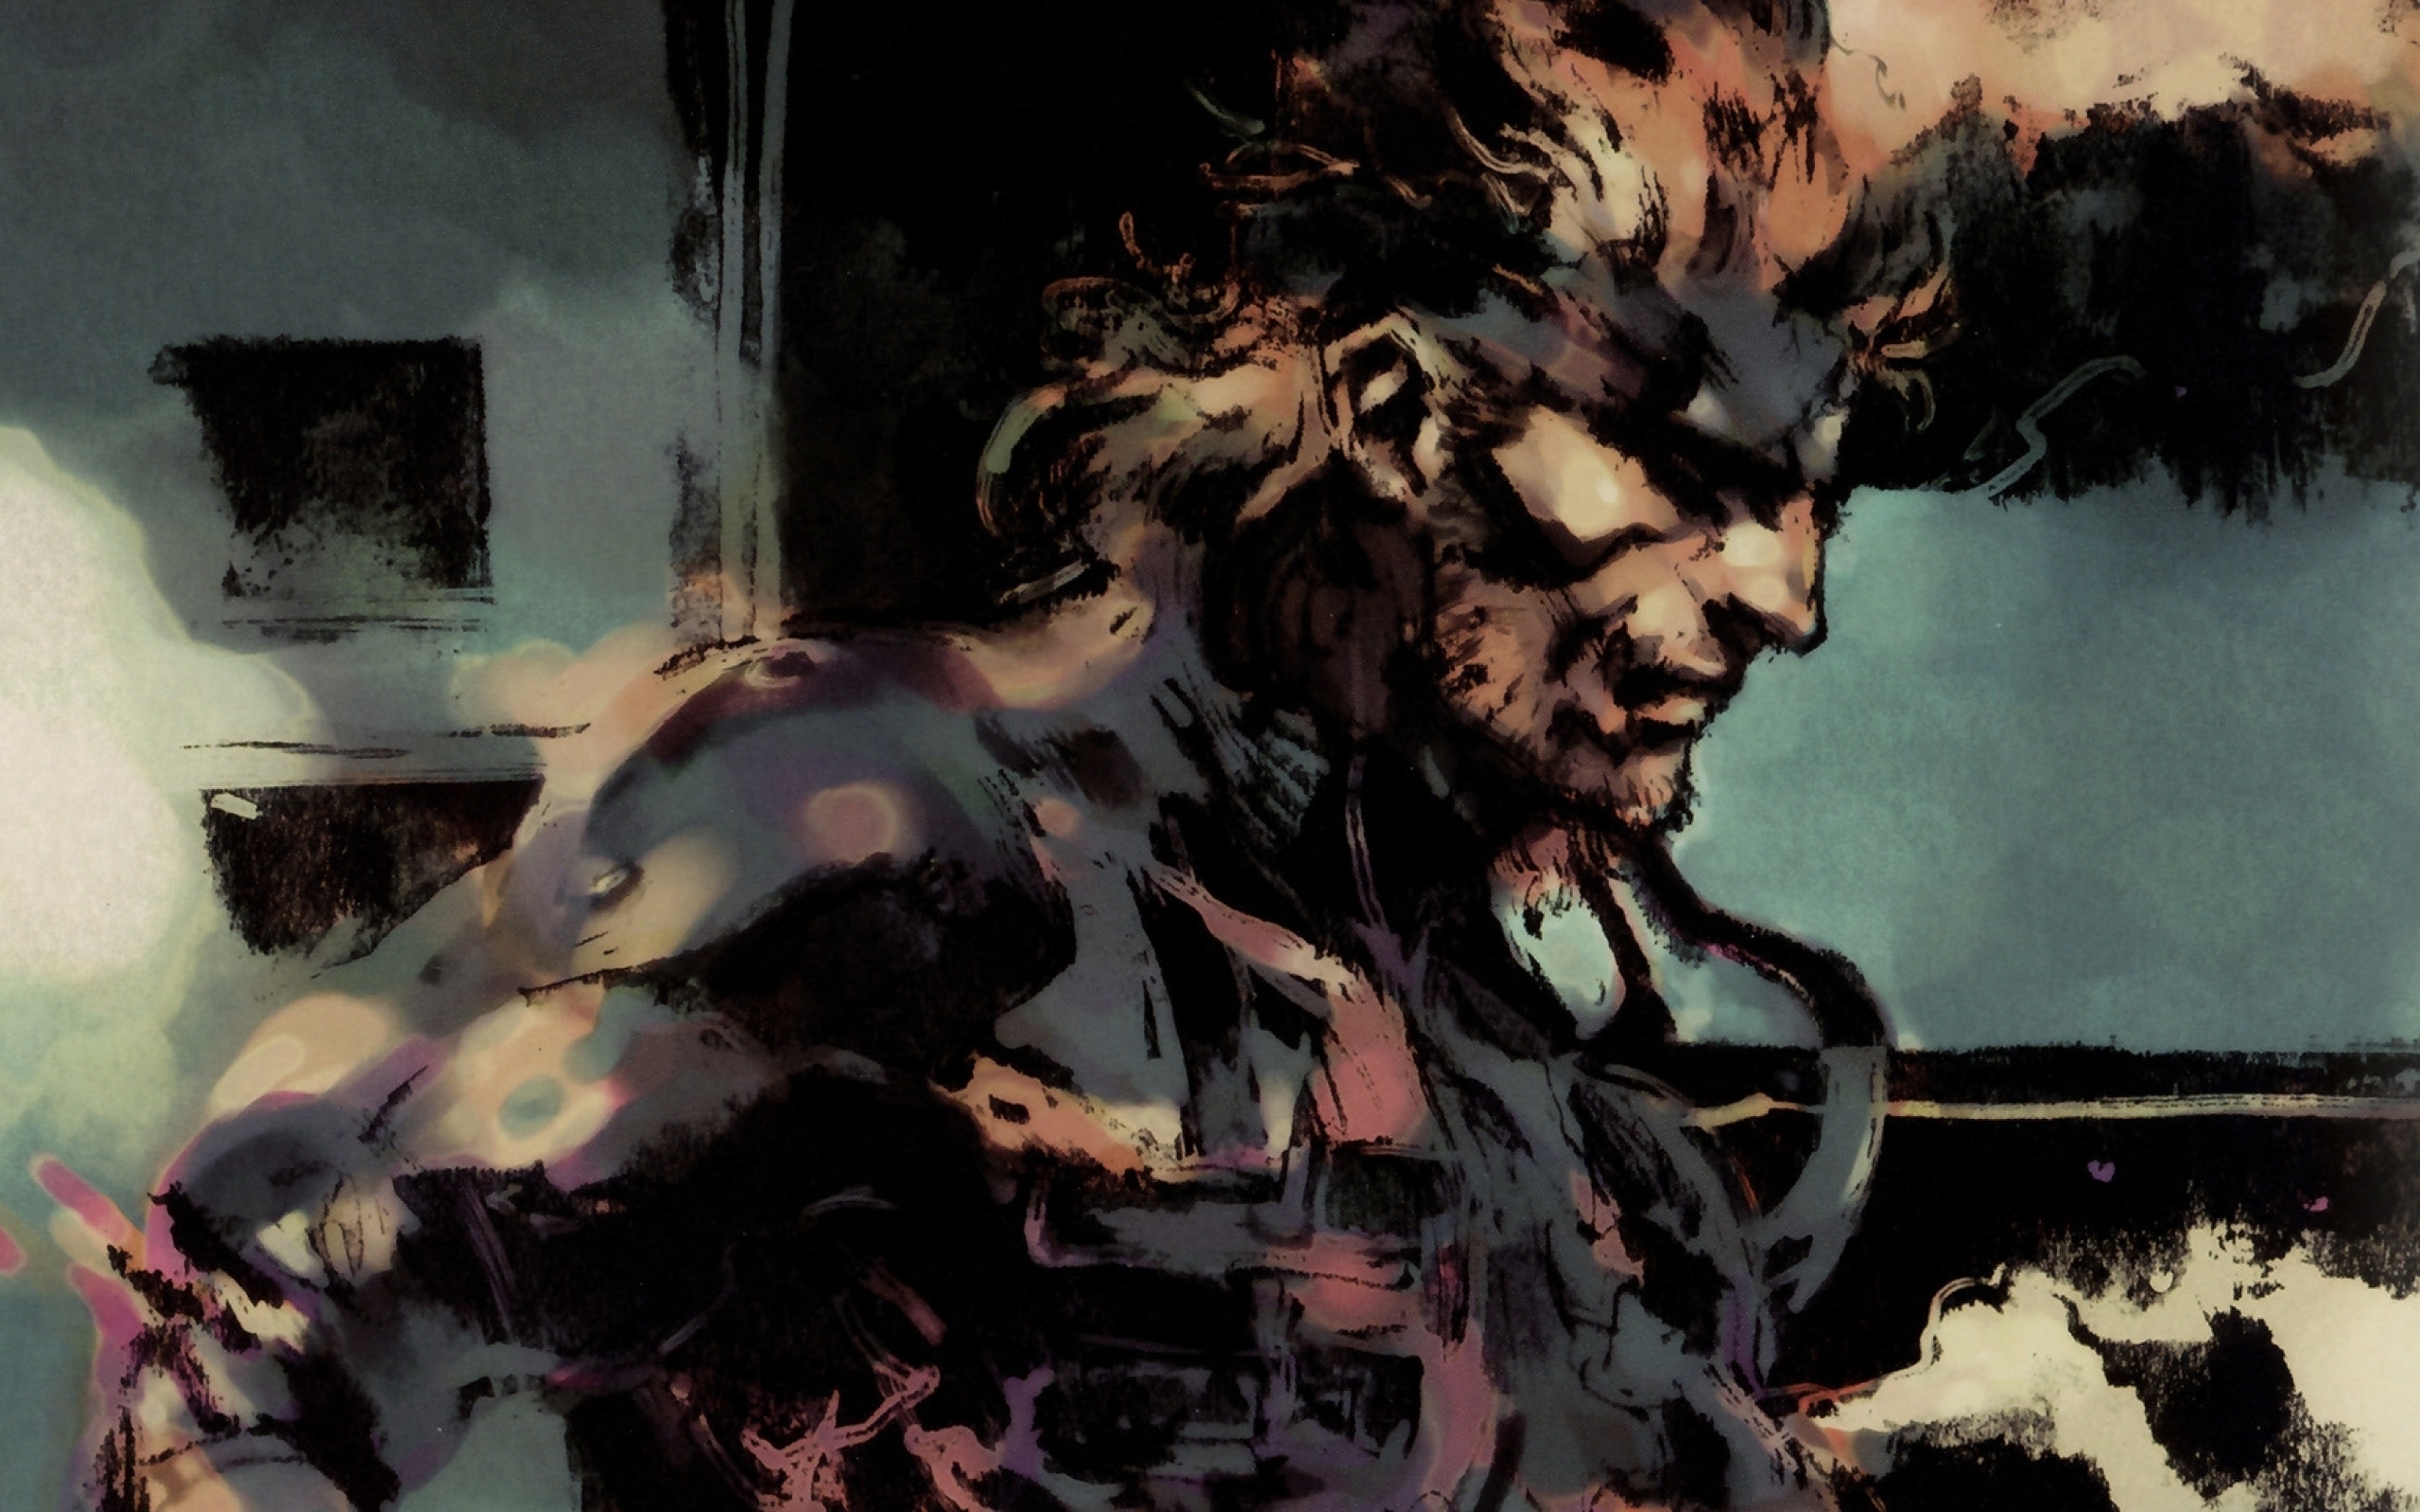 Gallery For Gt Solid Snake Wallpaper